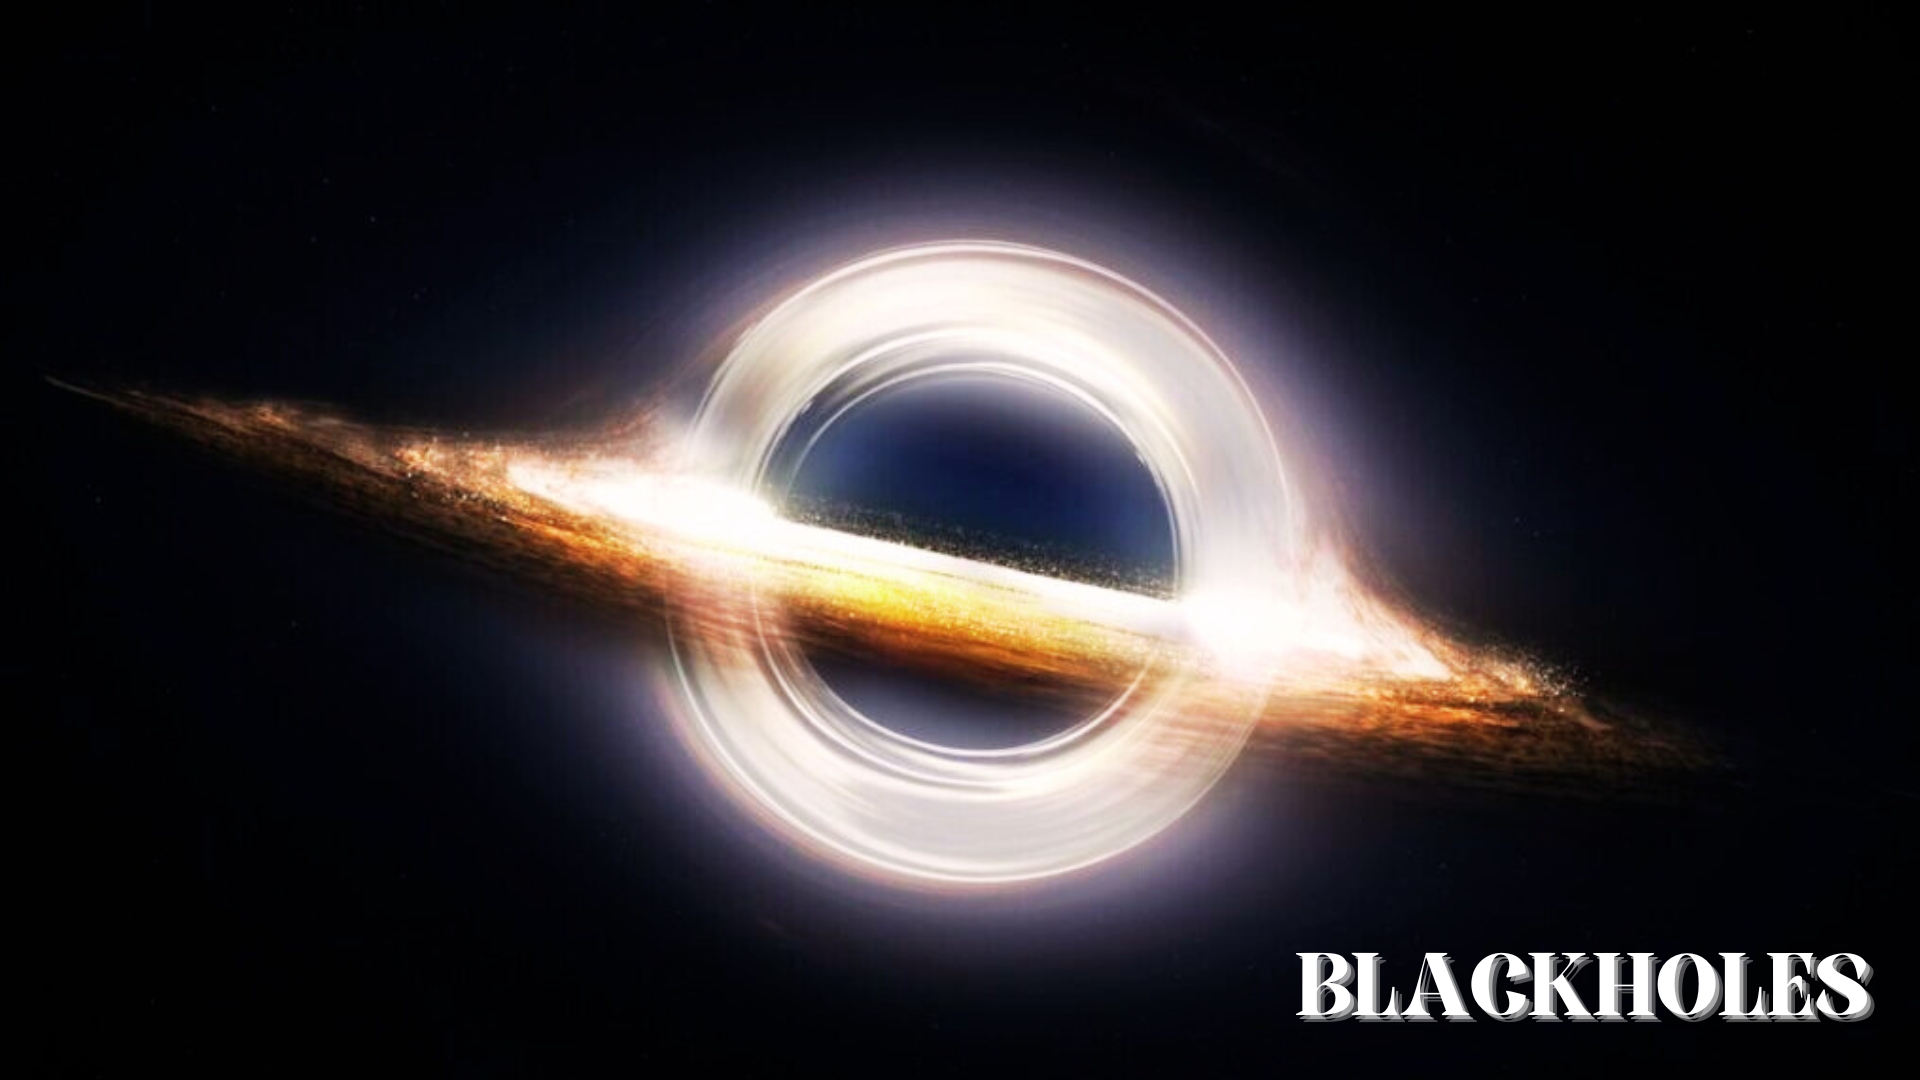 Blackholes are the most powerful thing in the universe?